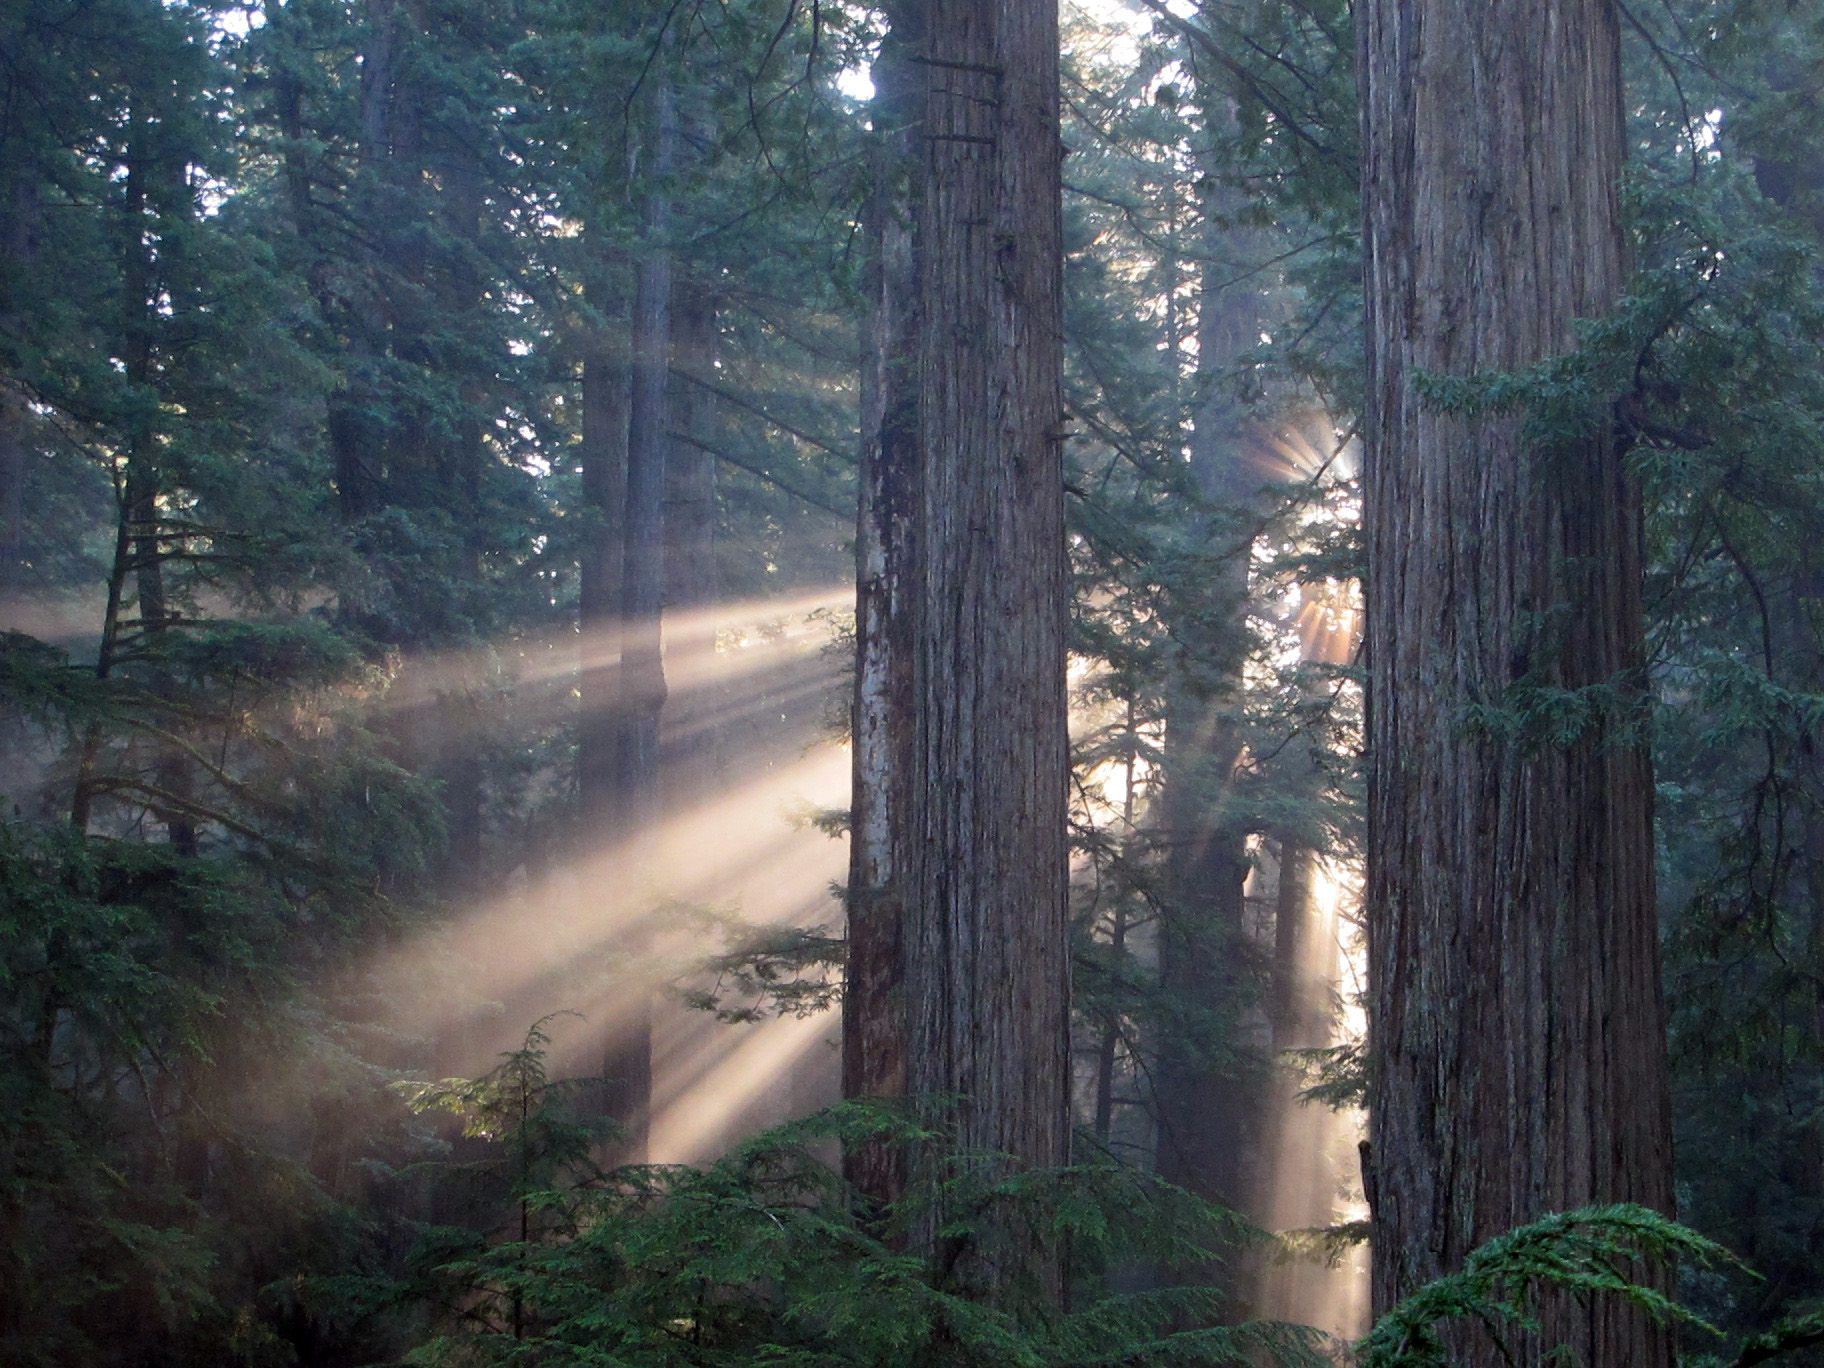 Sun filters through the Cathedral-like coast redwood forest of Jedediah Smith Redwoods State Park. Photo by Stephen Sillett.